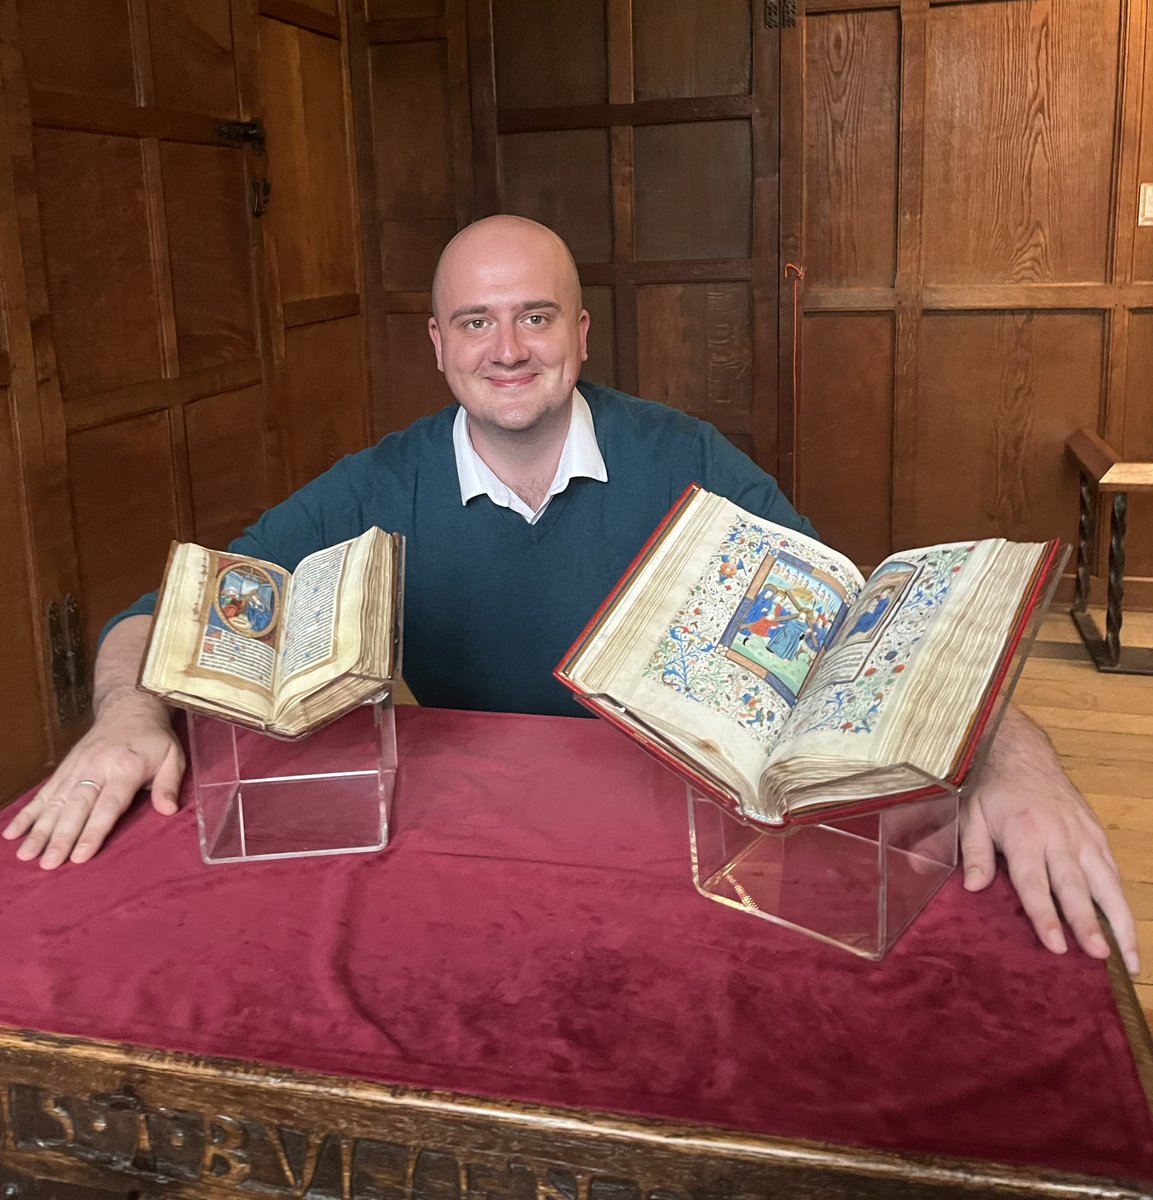 The best days at @HeverCastle are Books of Hours days. Preparing for a very exciting new exhibition, coming in 2023! Watch this space… #AnneBoleyn #LeTempsViendra